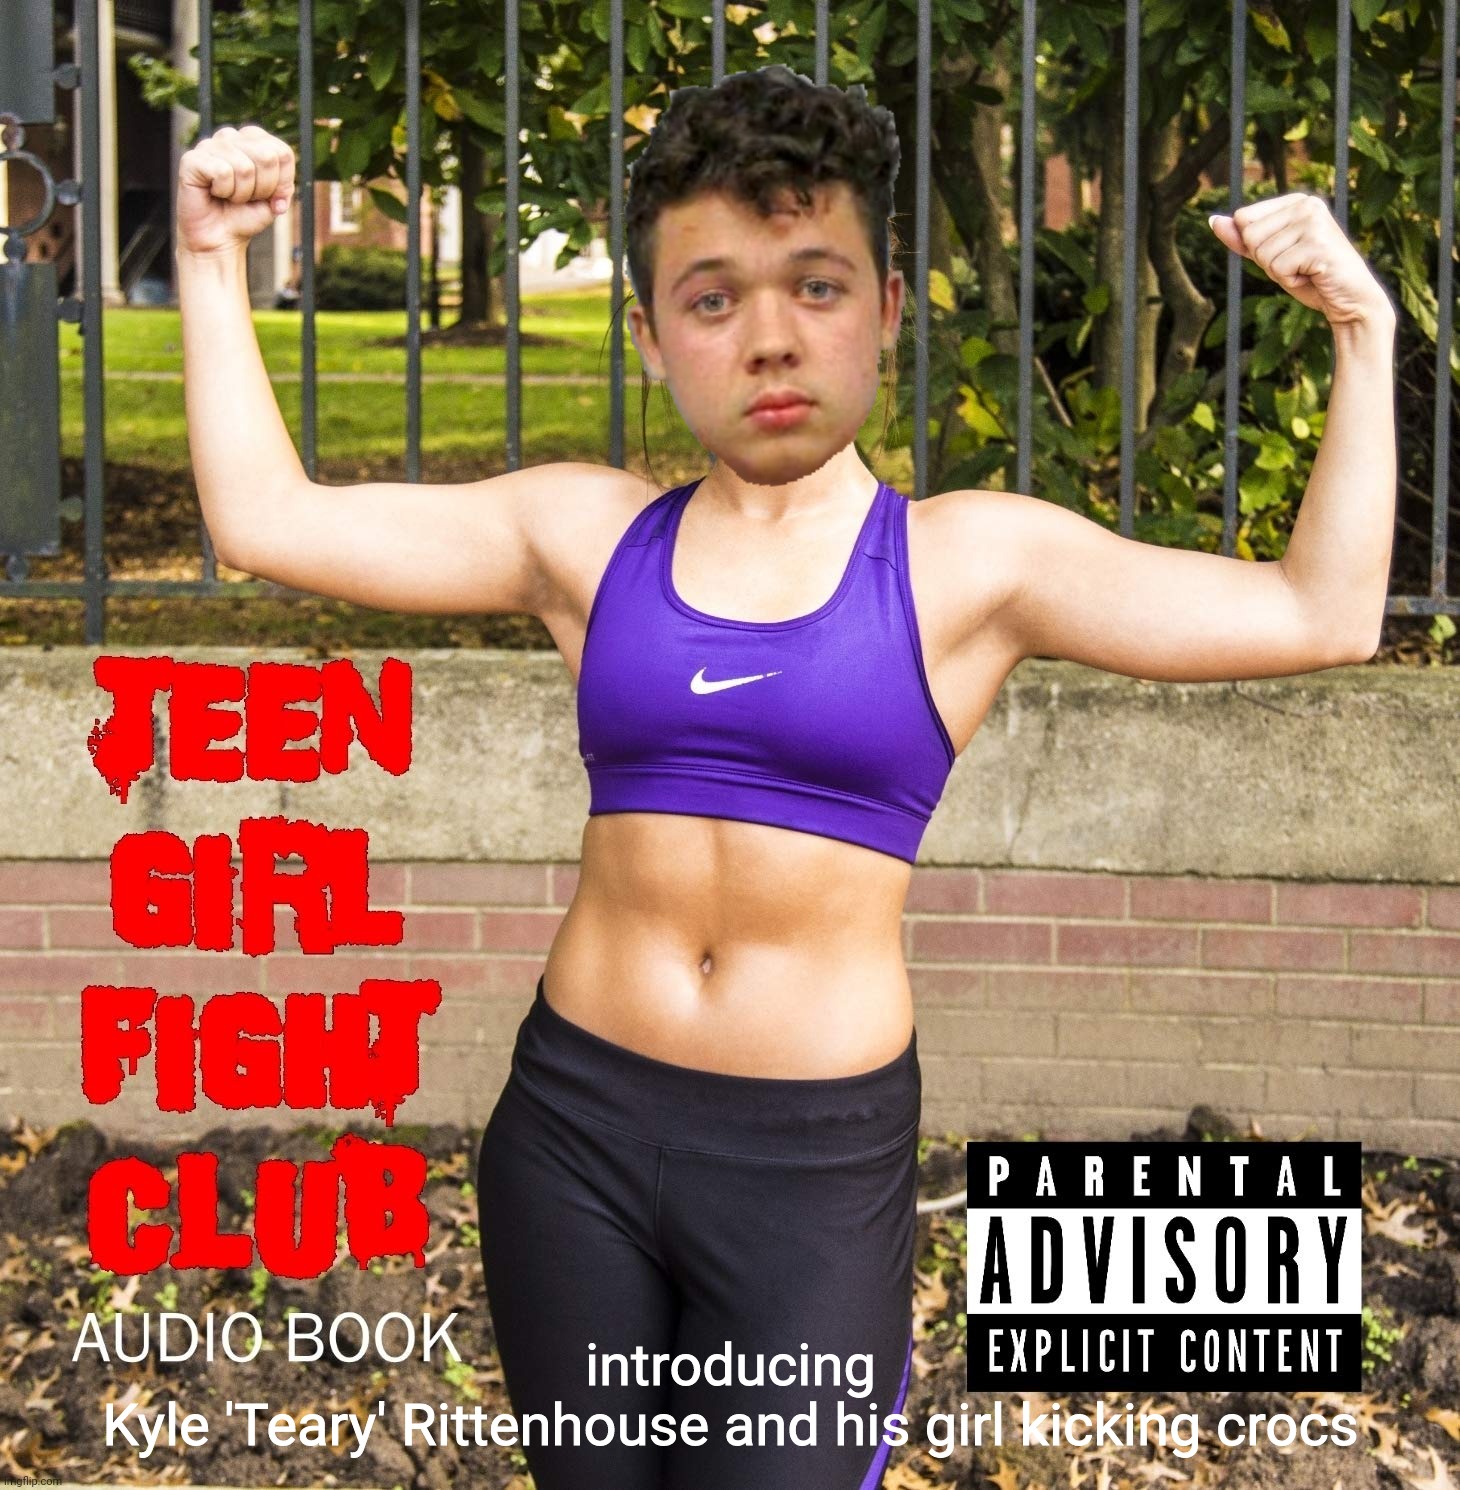  introducing
Kyle 'Teary' Rittenhouse and his girl kicking crocs | image tagged in teen girl fight club,kyle rittenhouse hit girl,kyle rittenhouse,kyle rittenhouse fight teen girl | made w/ Imgflip meme maker